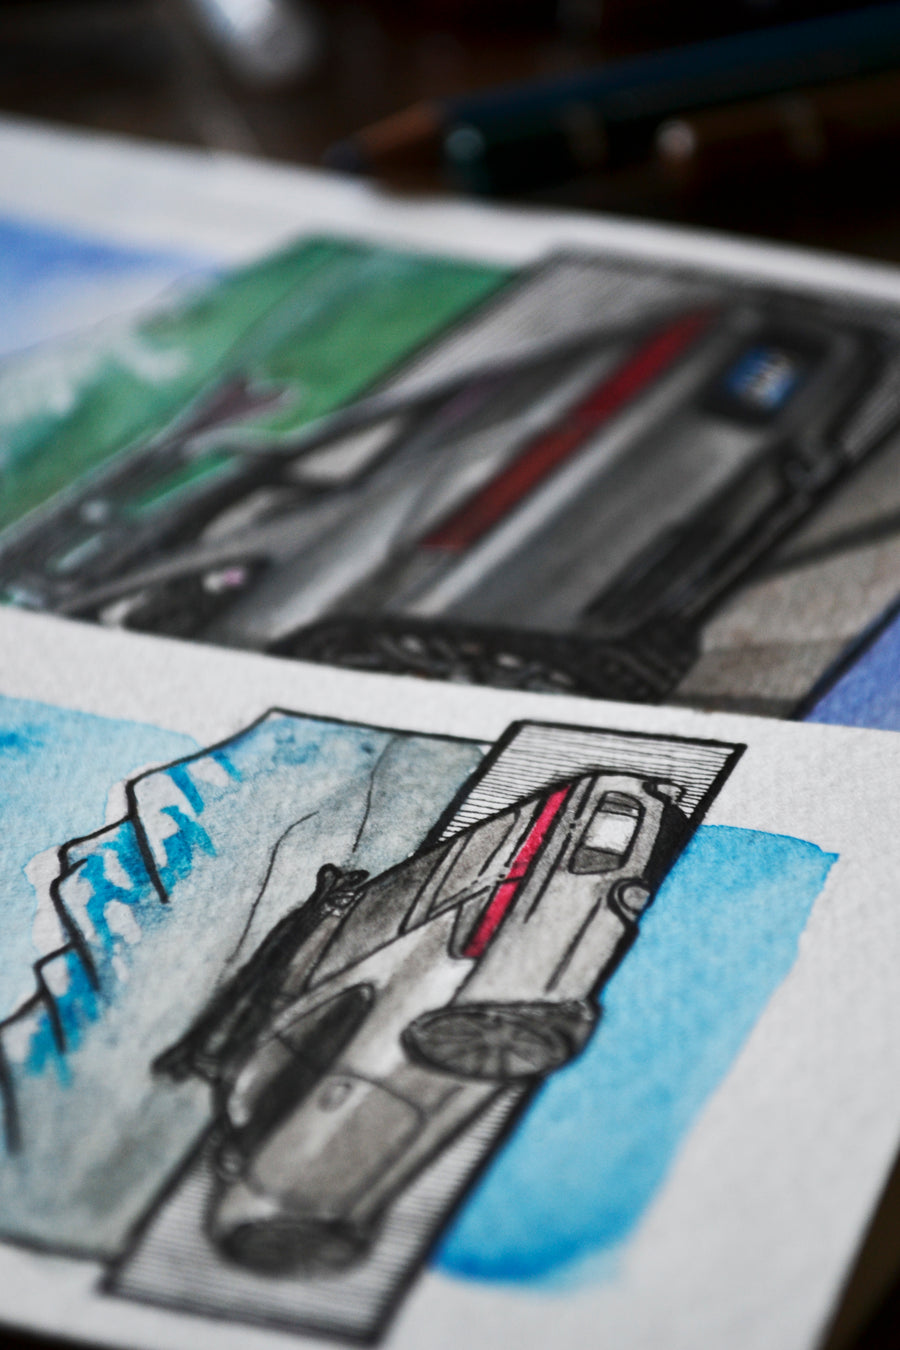 Inspiration from @996.ski.4s's Porsche 996 C4S / Handmade Artwork and Exposition Stand